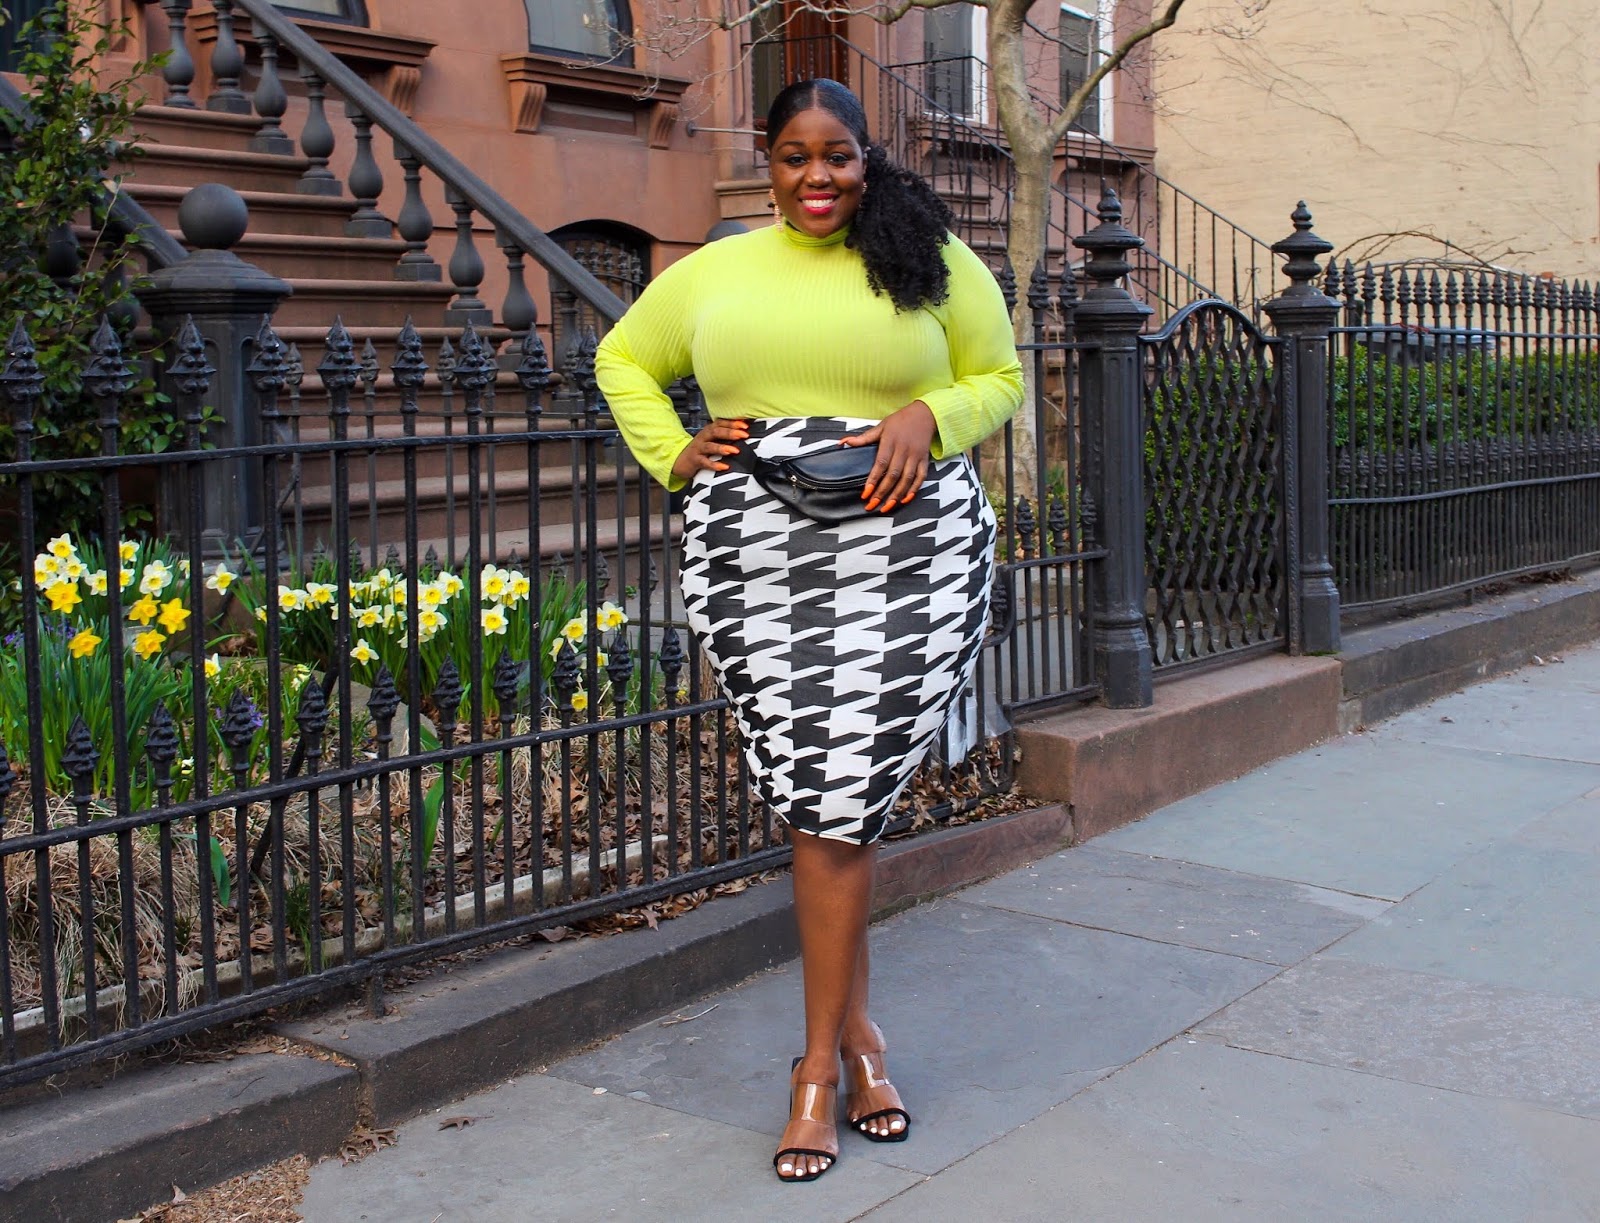 How to look SNATCHED in Body-Hugging Clothes! – On The Q Train